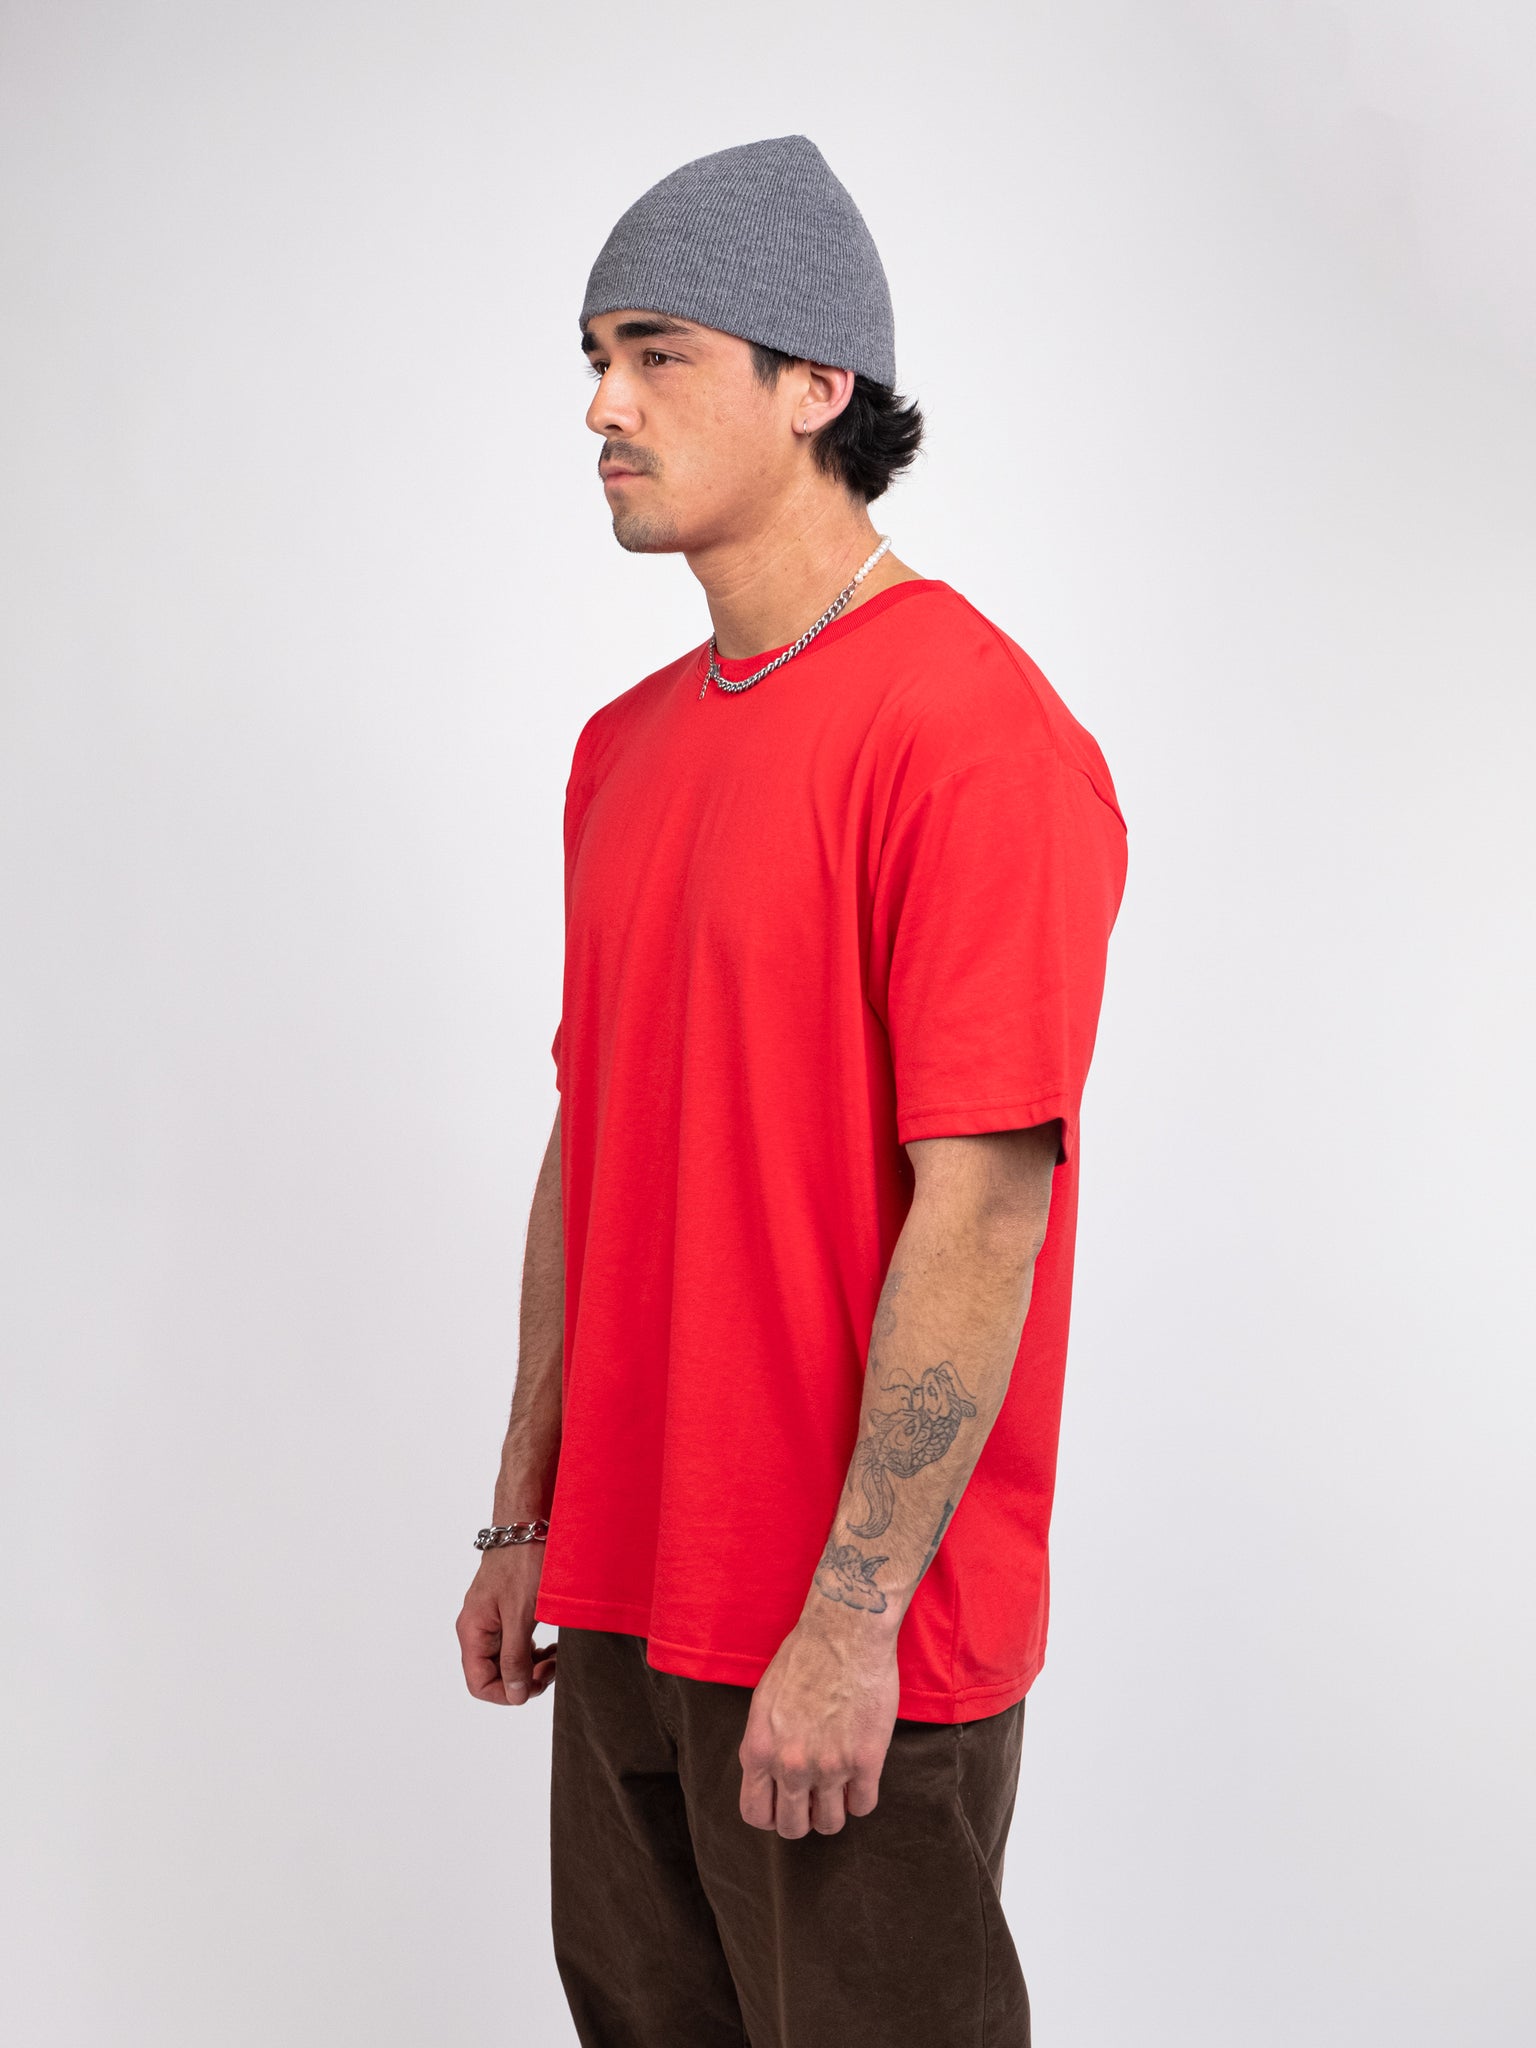 Relaxed Fit T-Shirt Fire Whirl - v2